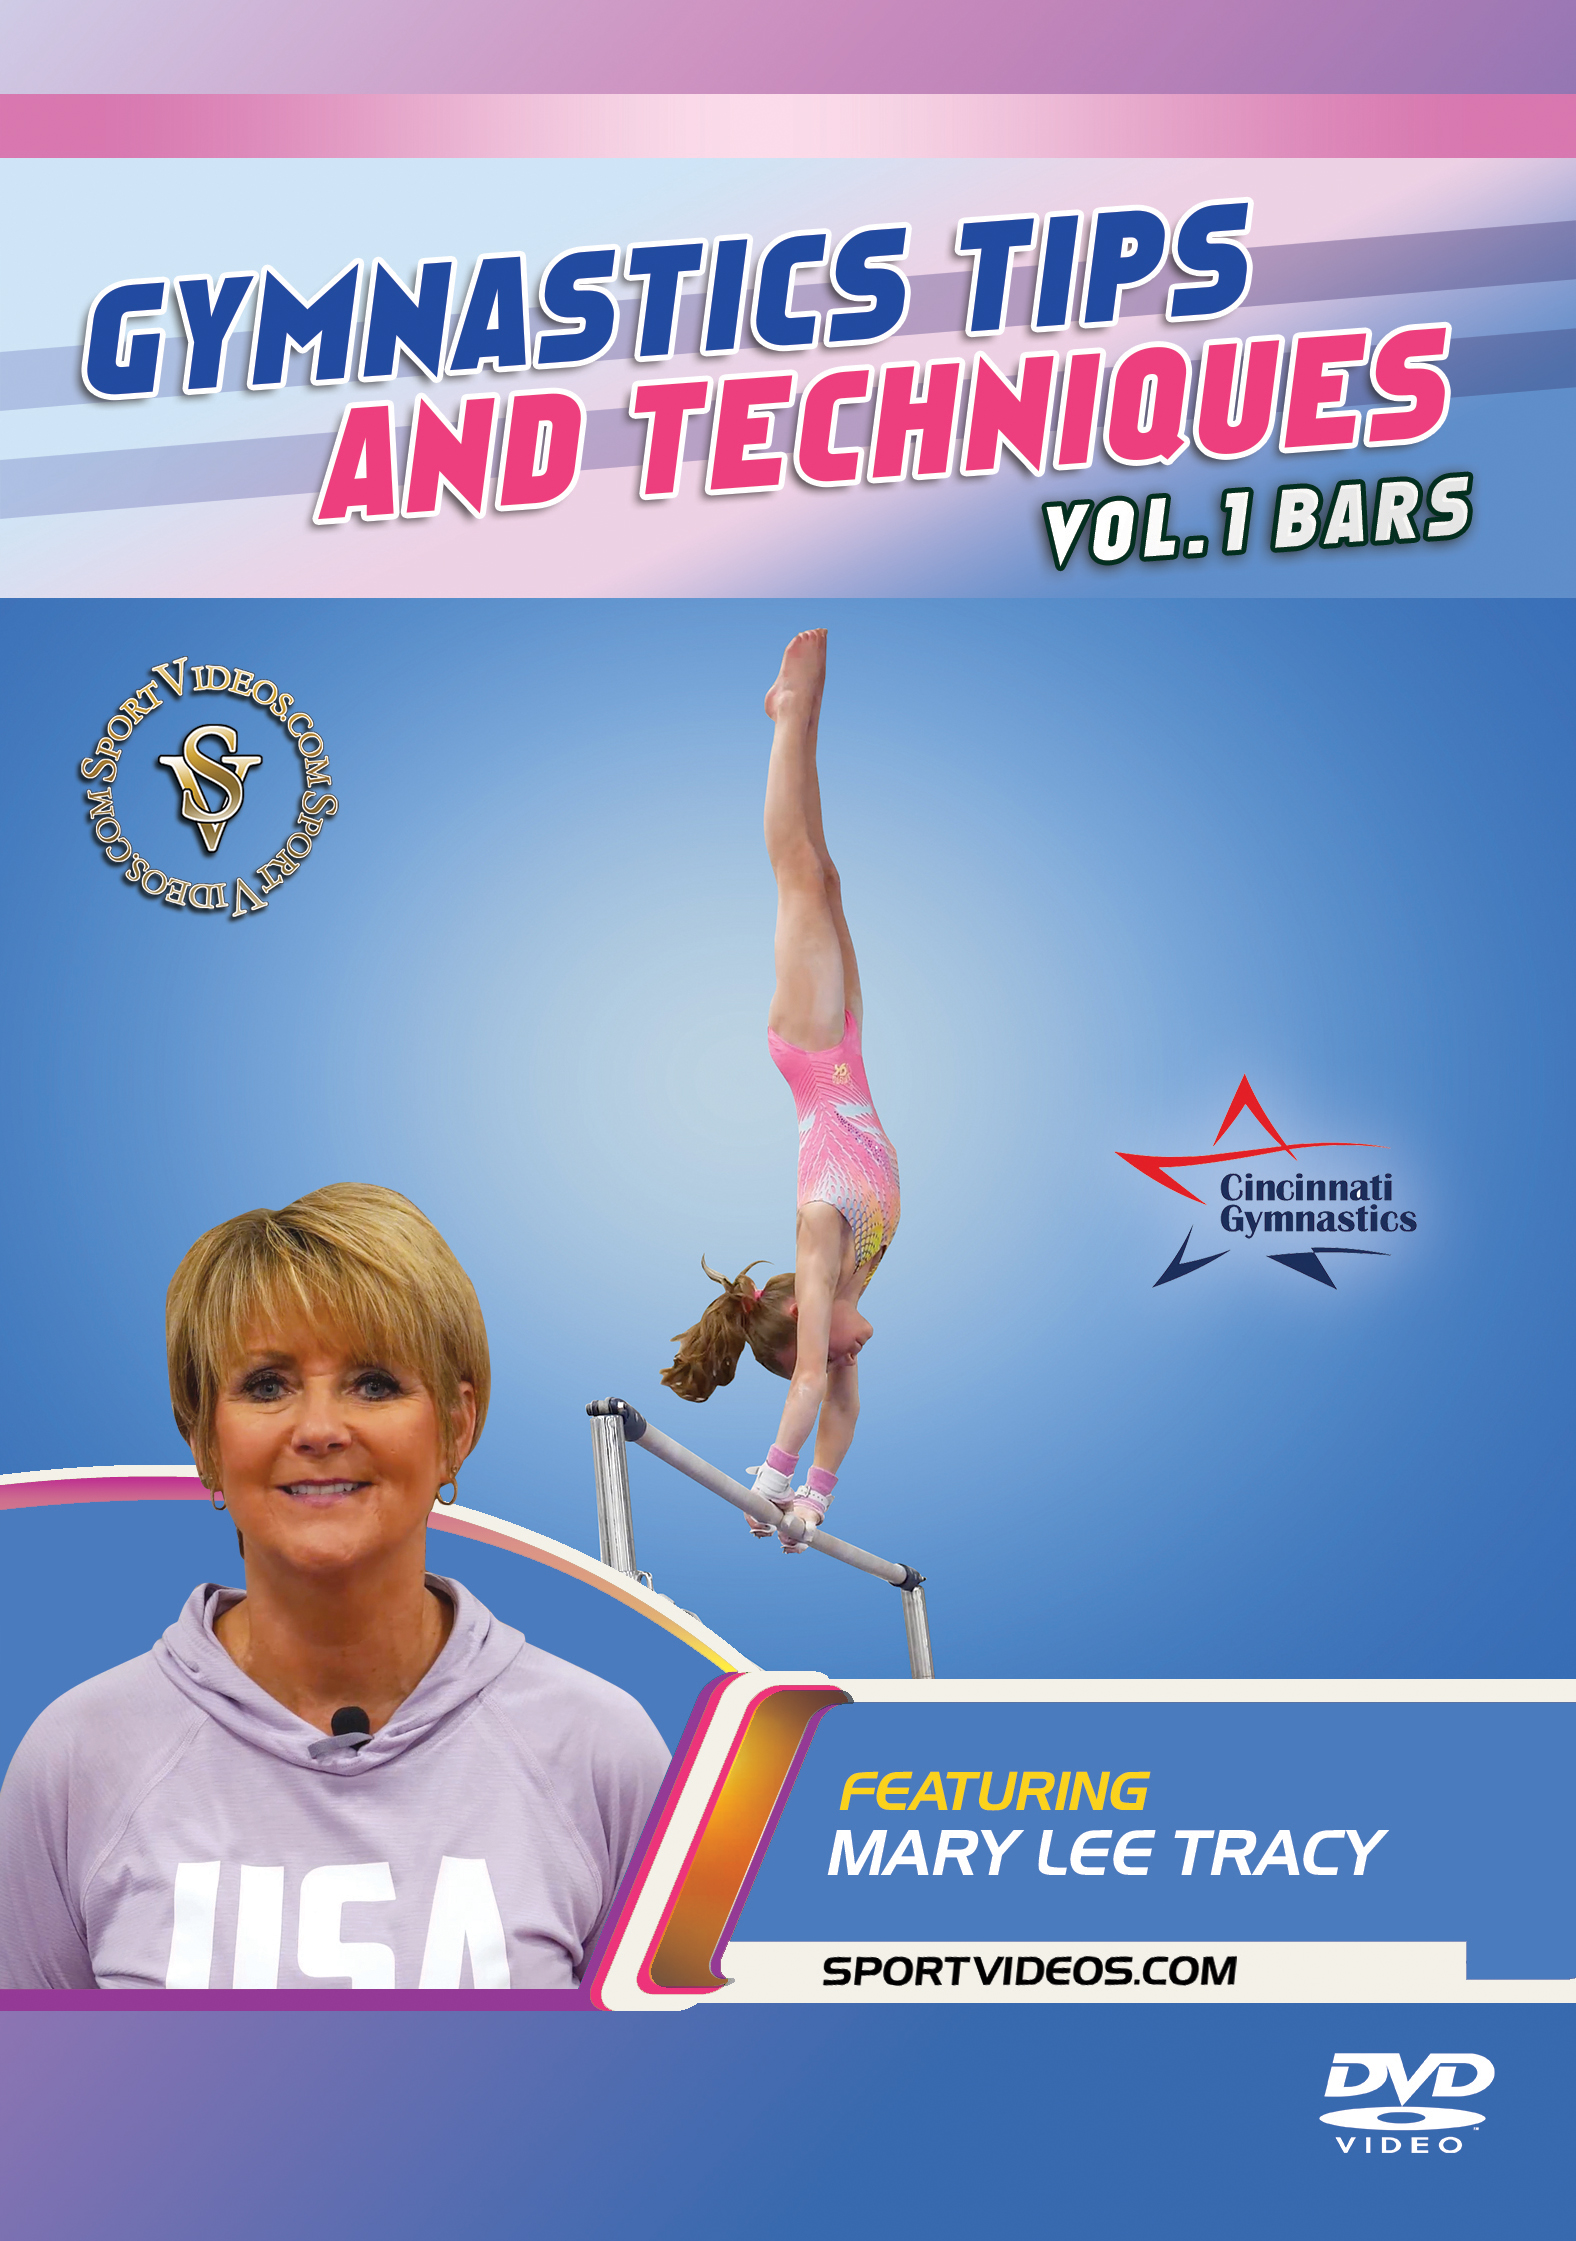 Gymnastics Tips and Techniques - Vol. 1 Bars  Download featuring Coach Mary Lee Tracy (2018 Title)